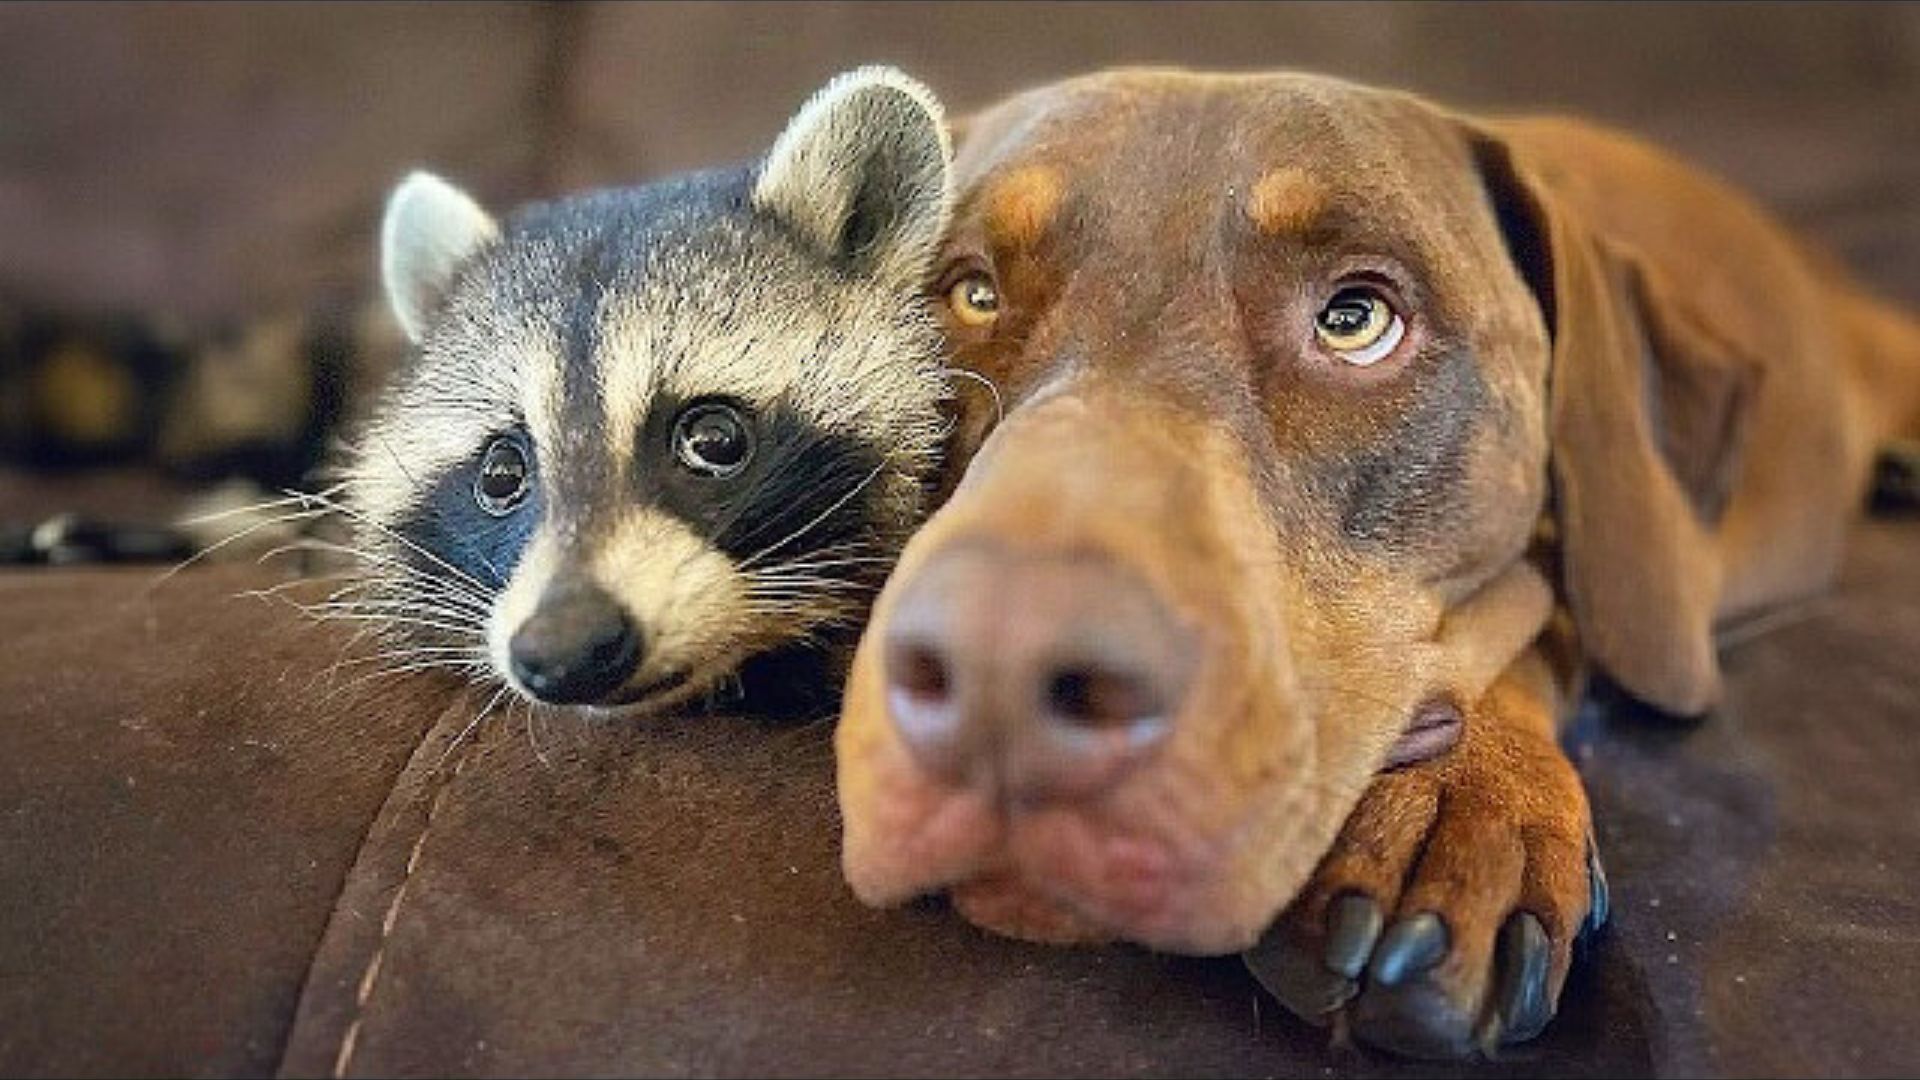 Witness This Beautiful Friendship Between A Wild Raccoon And A Sweet Dog